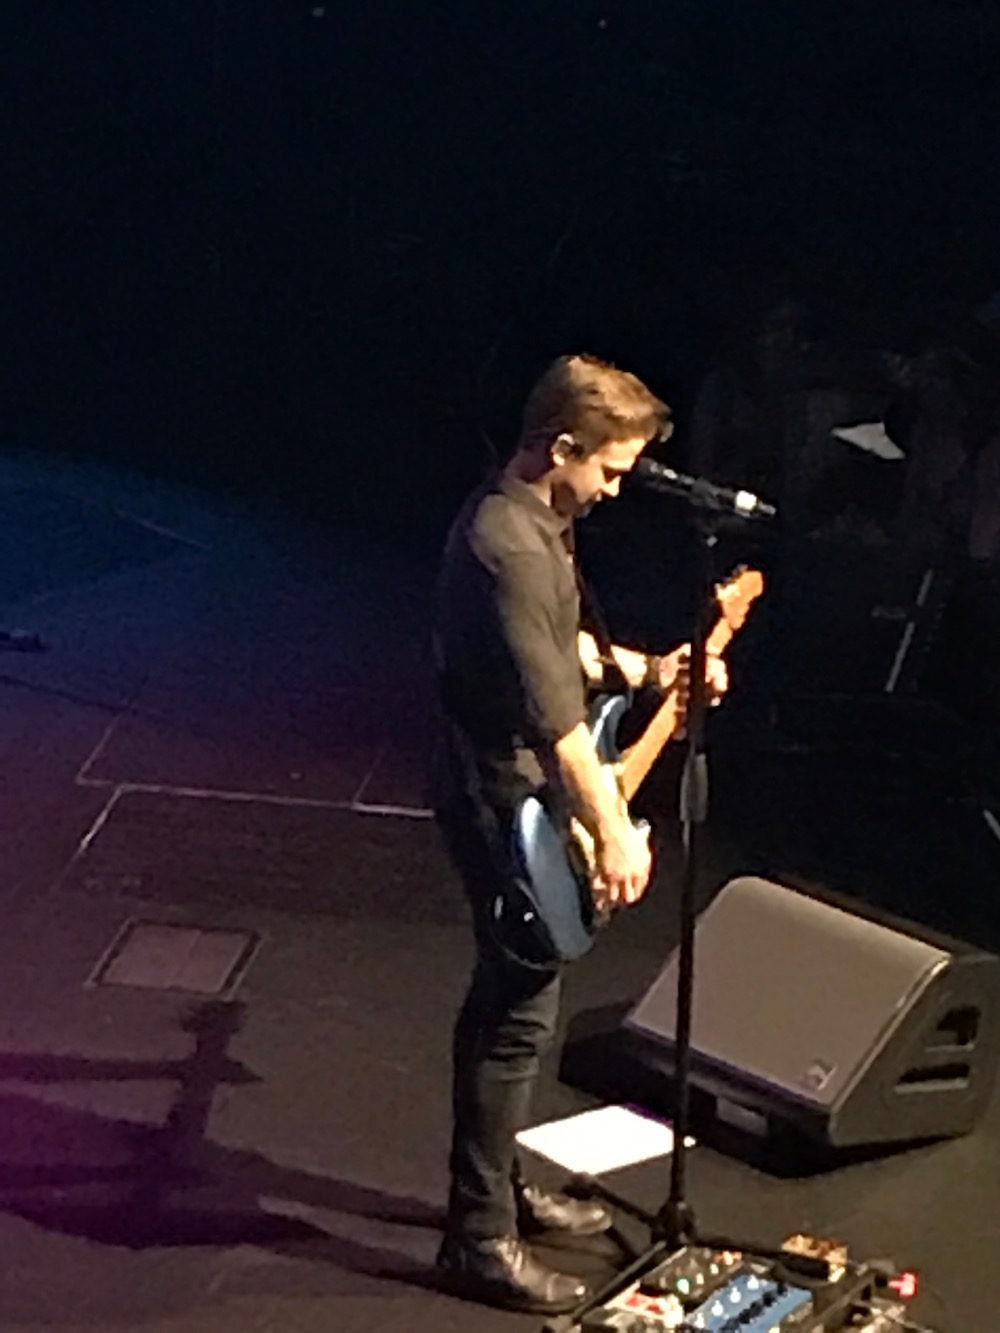 There's plenty of entertainment aboard Carnival Cruise. Sometimes you even get a surprise guest! We were treated with a surprise concert by Hunter Hayes.